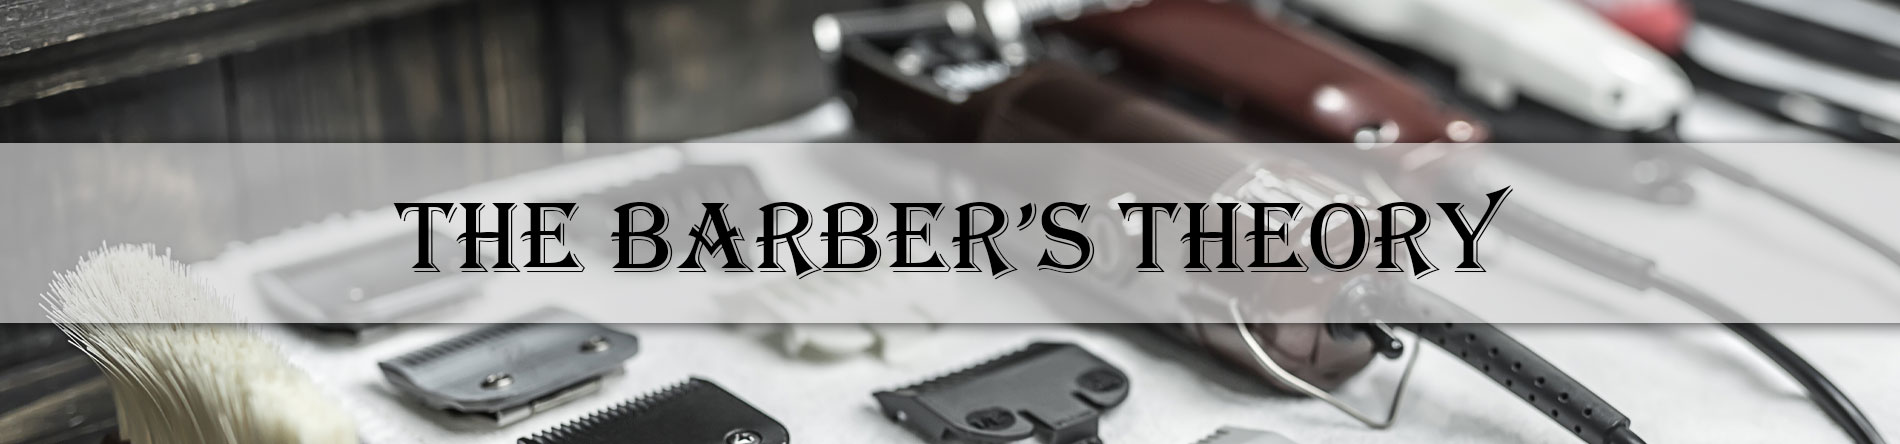 The Barber’s Theory